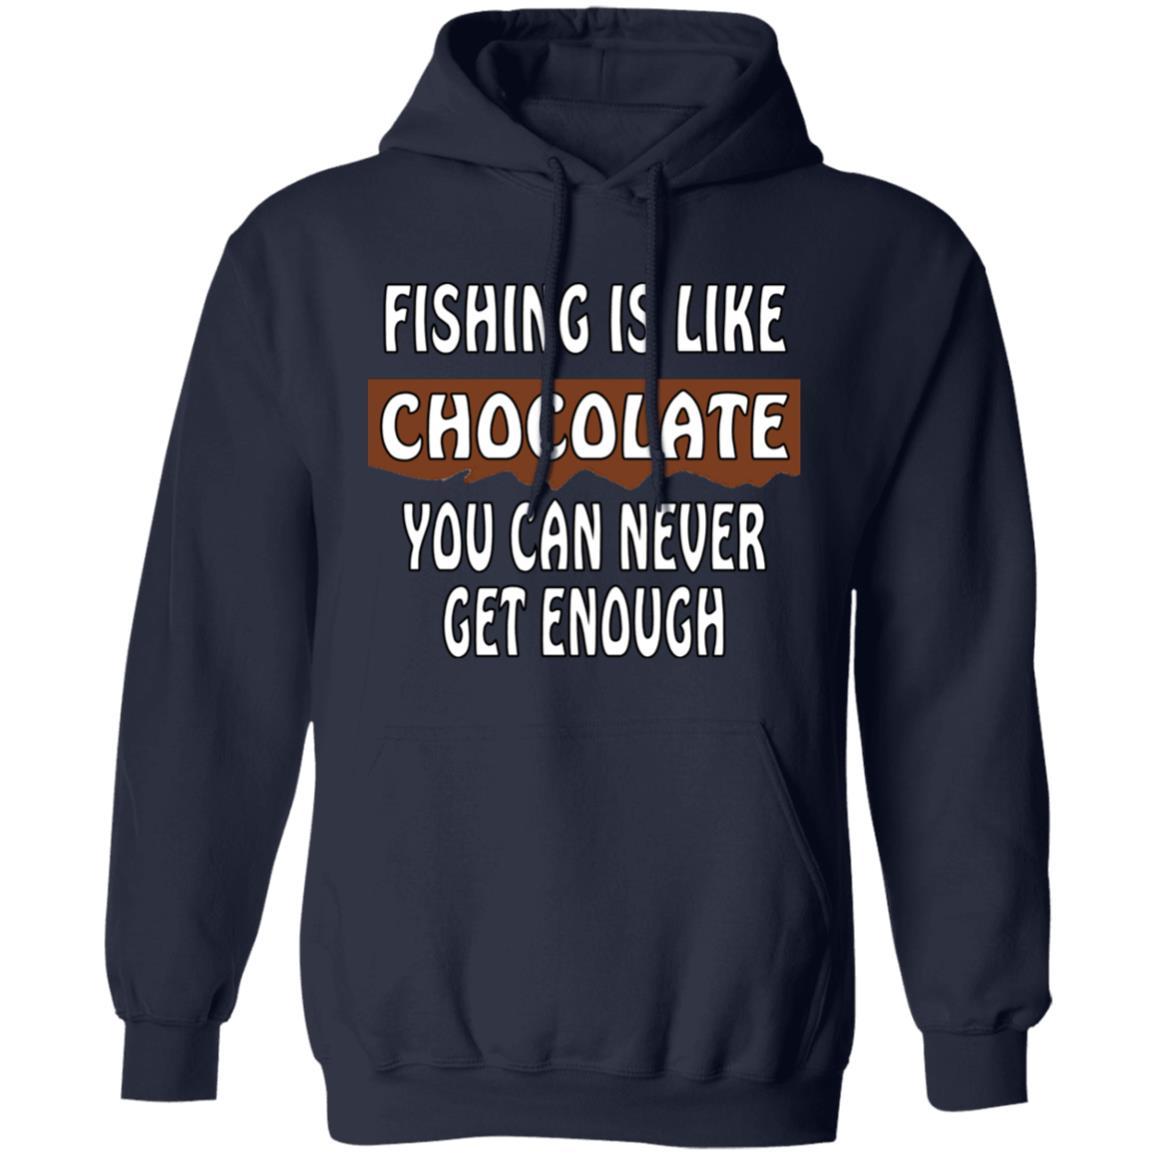 Fishing is like chocolate you can never get enough hoodie navy